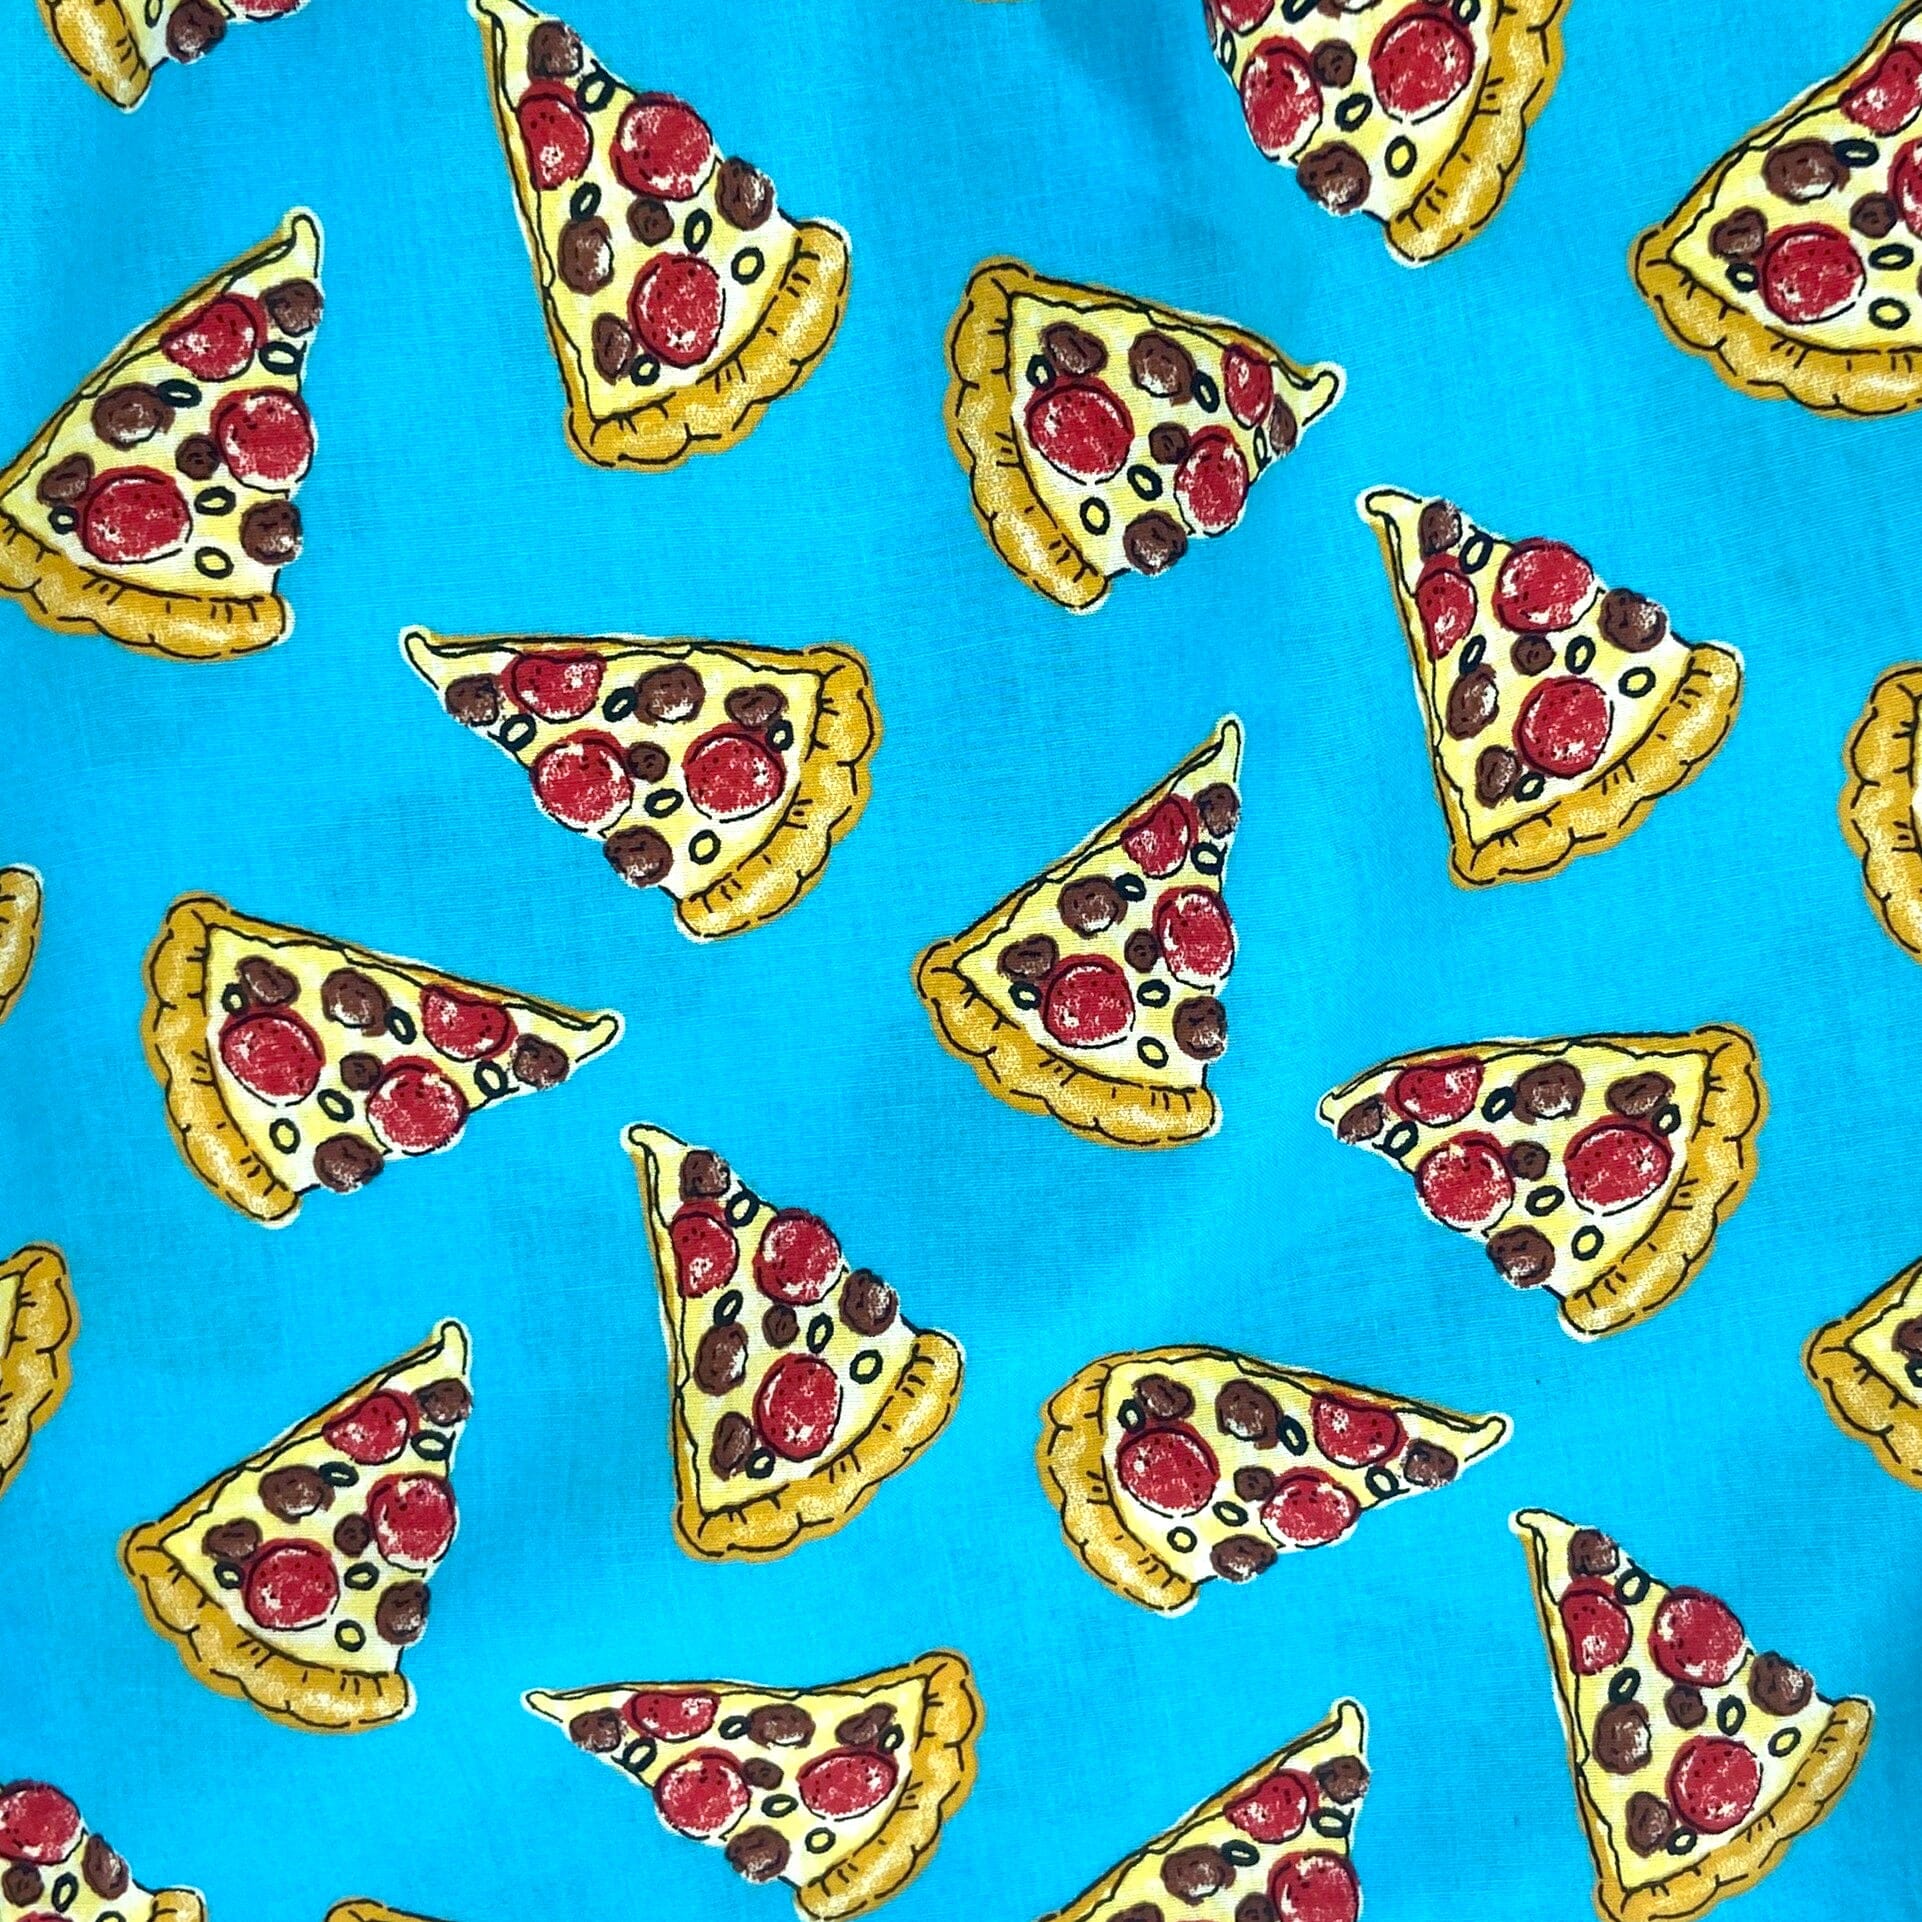 Buy Men's Cheesy Pepperoni Pizza Patterned Cotton Boxer Shorts Online